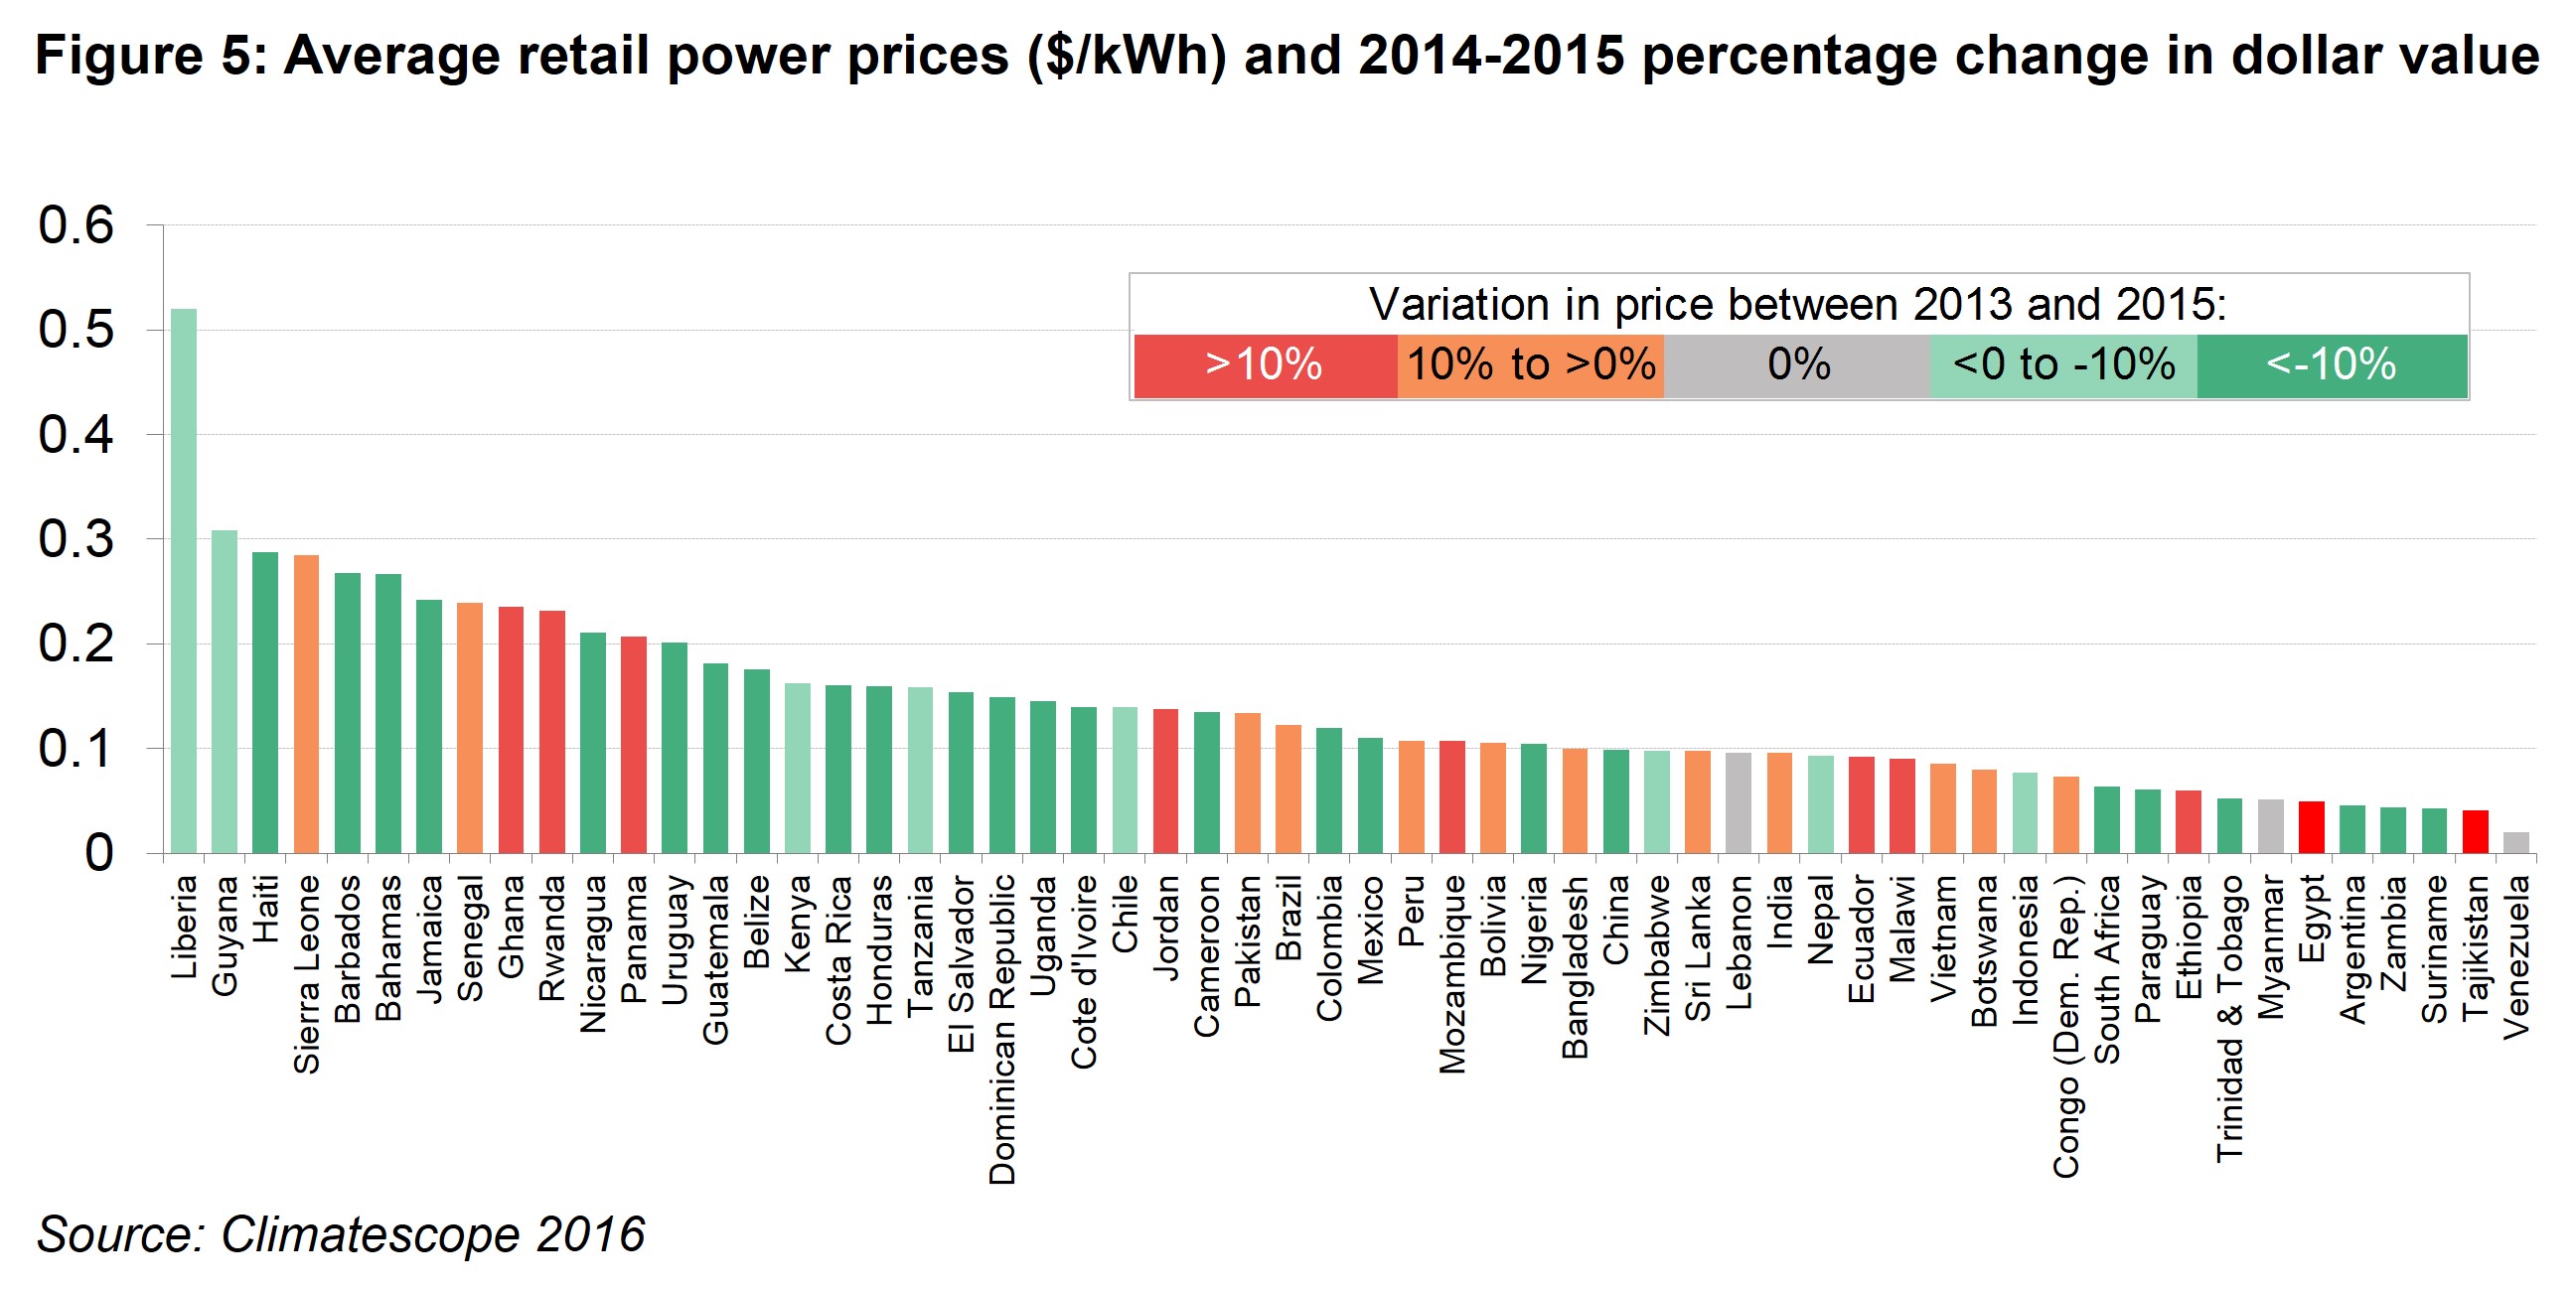 PI Fig 5 - Average retail power prices ($/kWh) and 2014-2015 percentage change in dollar value